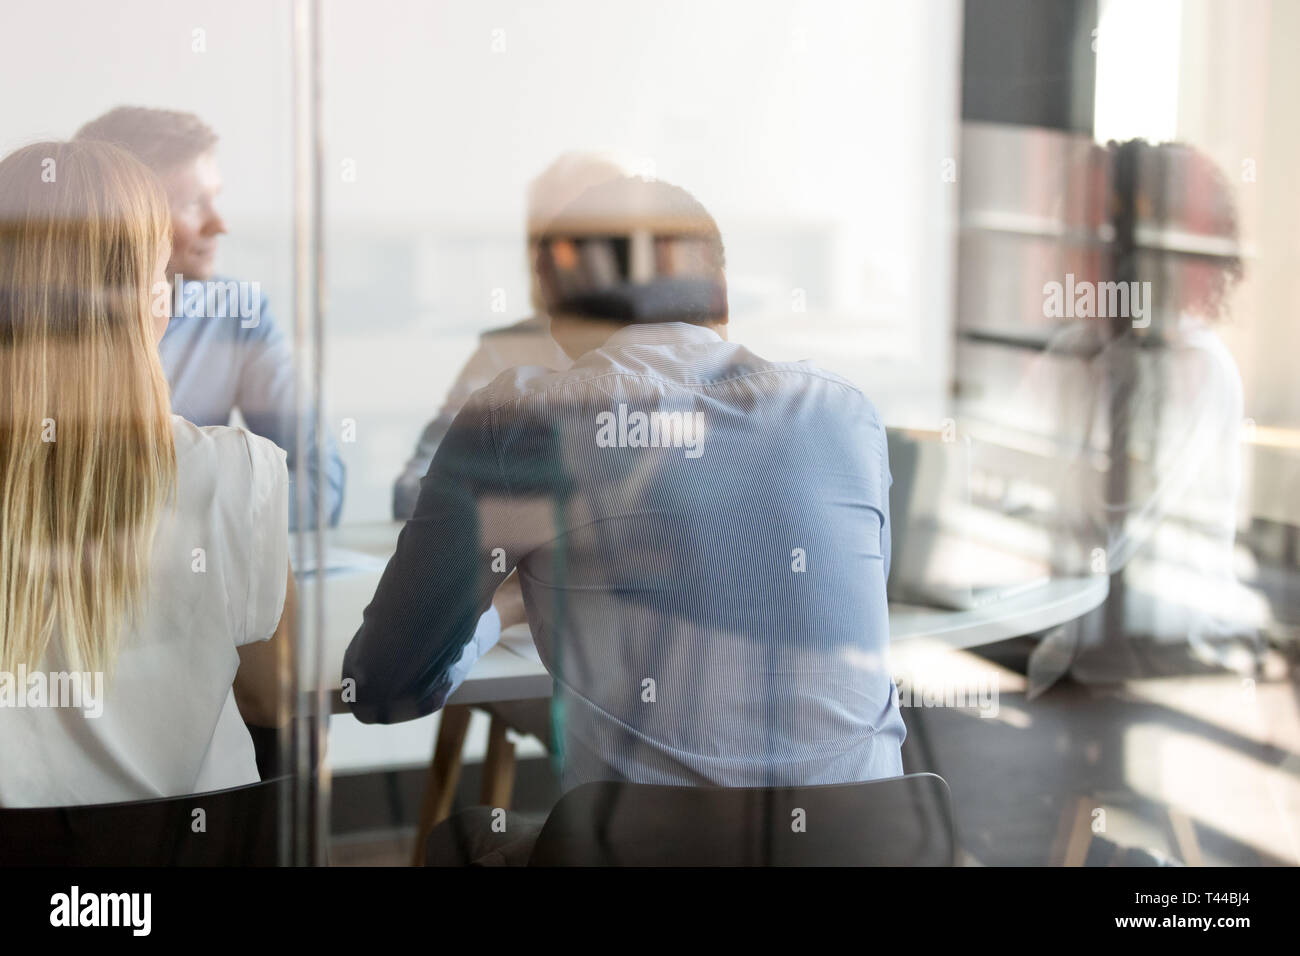 Multi ethnic business people negotiating at table view through glass Stock Photo